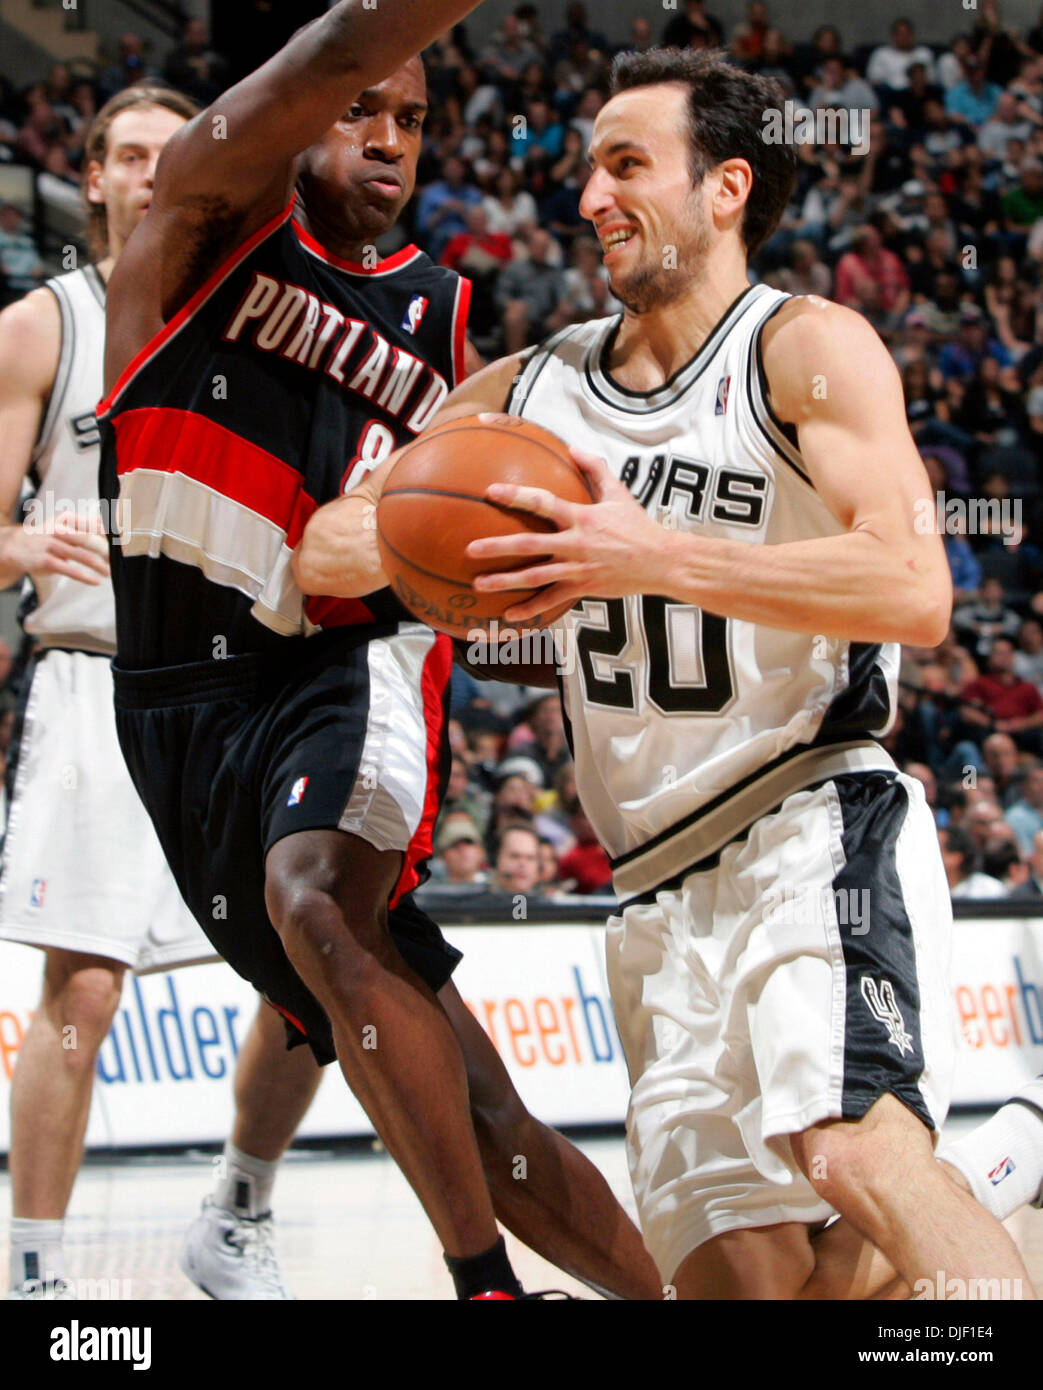 Dec 02, 2007 - San Antonio, Texas, USA - The San Antonio Spurs' MANU GINOBILI drives Sunday afternoon Dec. 2, 2007 at the AT&T Center in San Antonio around the Portland Trail Blazers' MARTELL WEBSTER during the second half of the Spurs' 100-97 win over the Blazers. (Credit Image: © William Luther/San Antonio Express-News/ZUMA Press) RESTRICTIONS: * San Antonio, Seattle Newspapers a Stock Photo